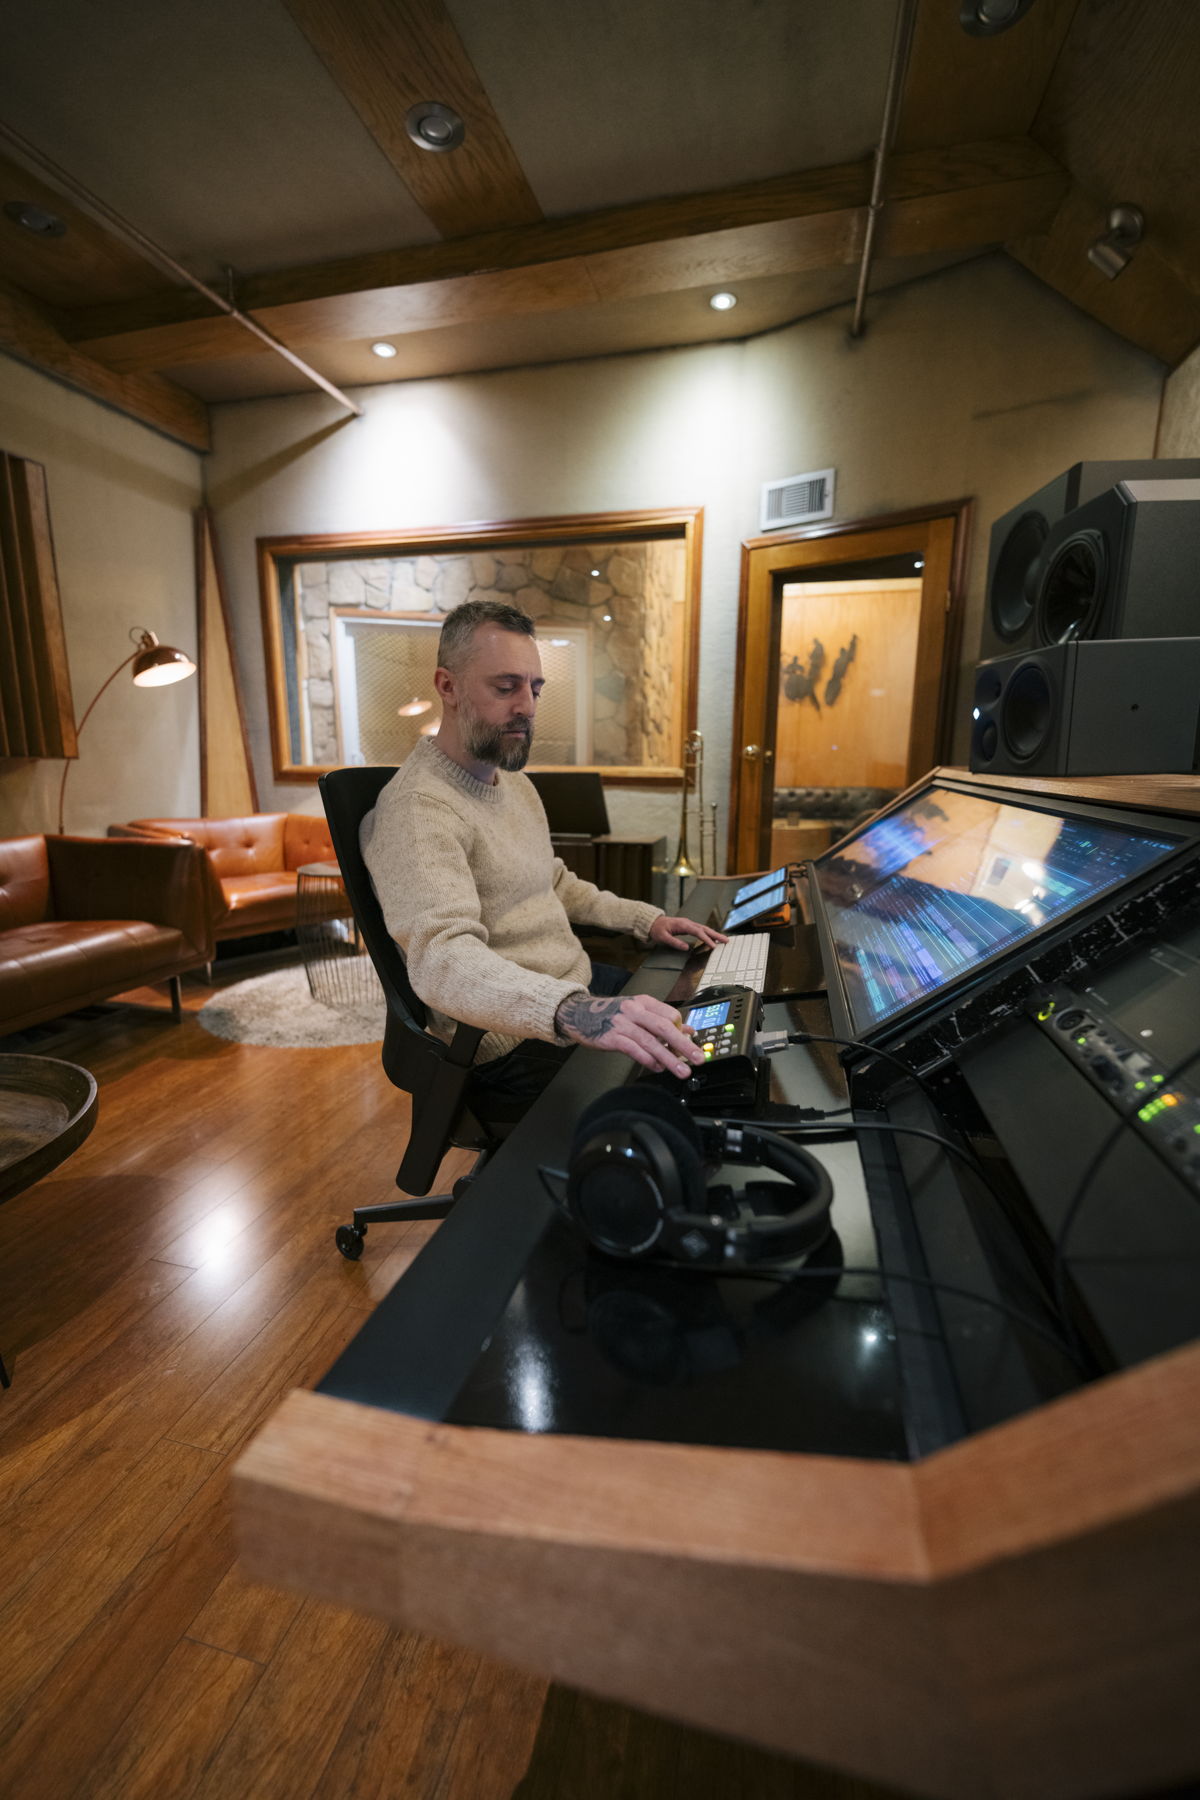 Mikaelin ‘Blue’ BlueSpruce mixes on his Neumann KH 310 monitors in Brown Sugar studio, with his trusted NDH 30 headphones at his side.  